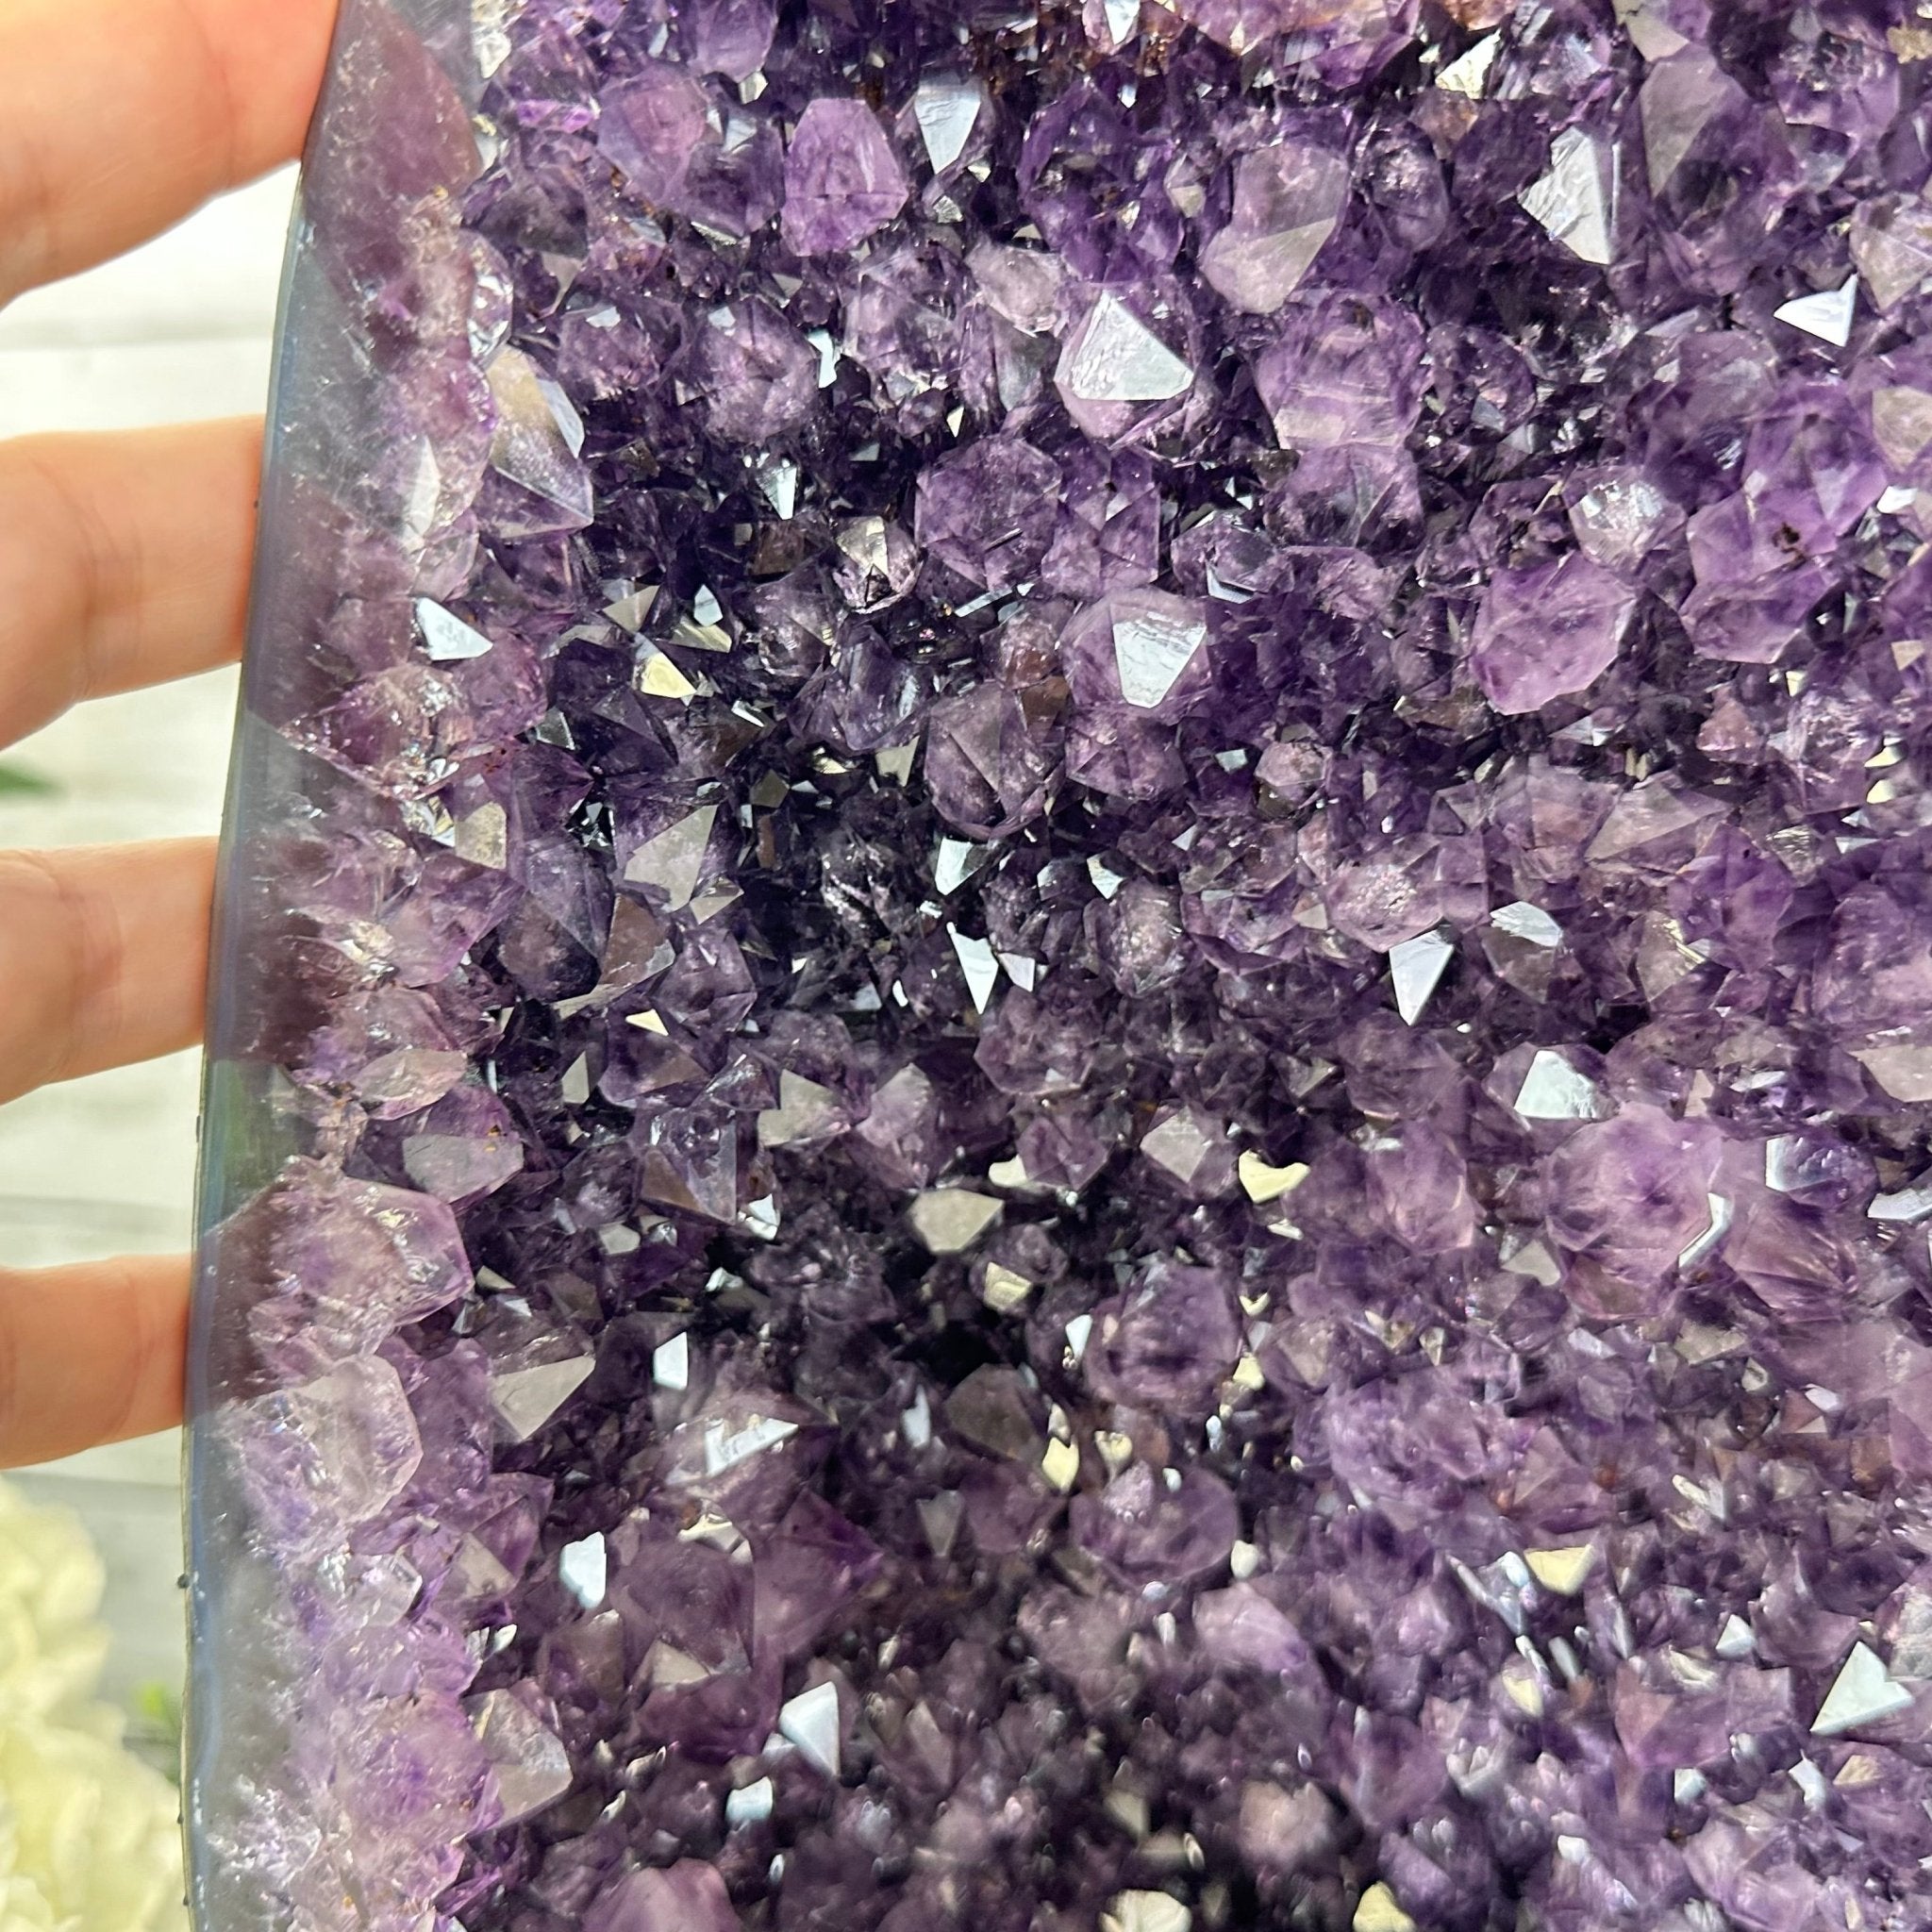 Quality Brazilian Amethyst Cathedral, 32.1 lbs & 17.8" Tall, #5601 - 1409 - Brazil GemsBrazil GemsQuality Brazilian Amethyst Cathedral, 32.1 lbs & 17.8" Tall, #5601 - 1409Cathedrals5601 - 1409